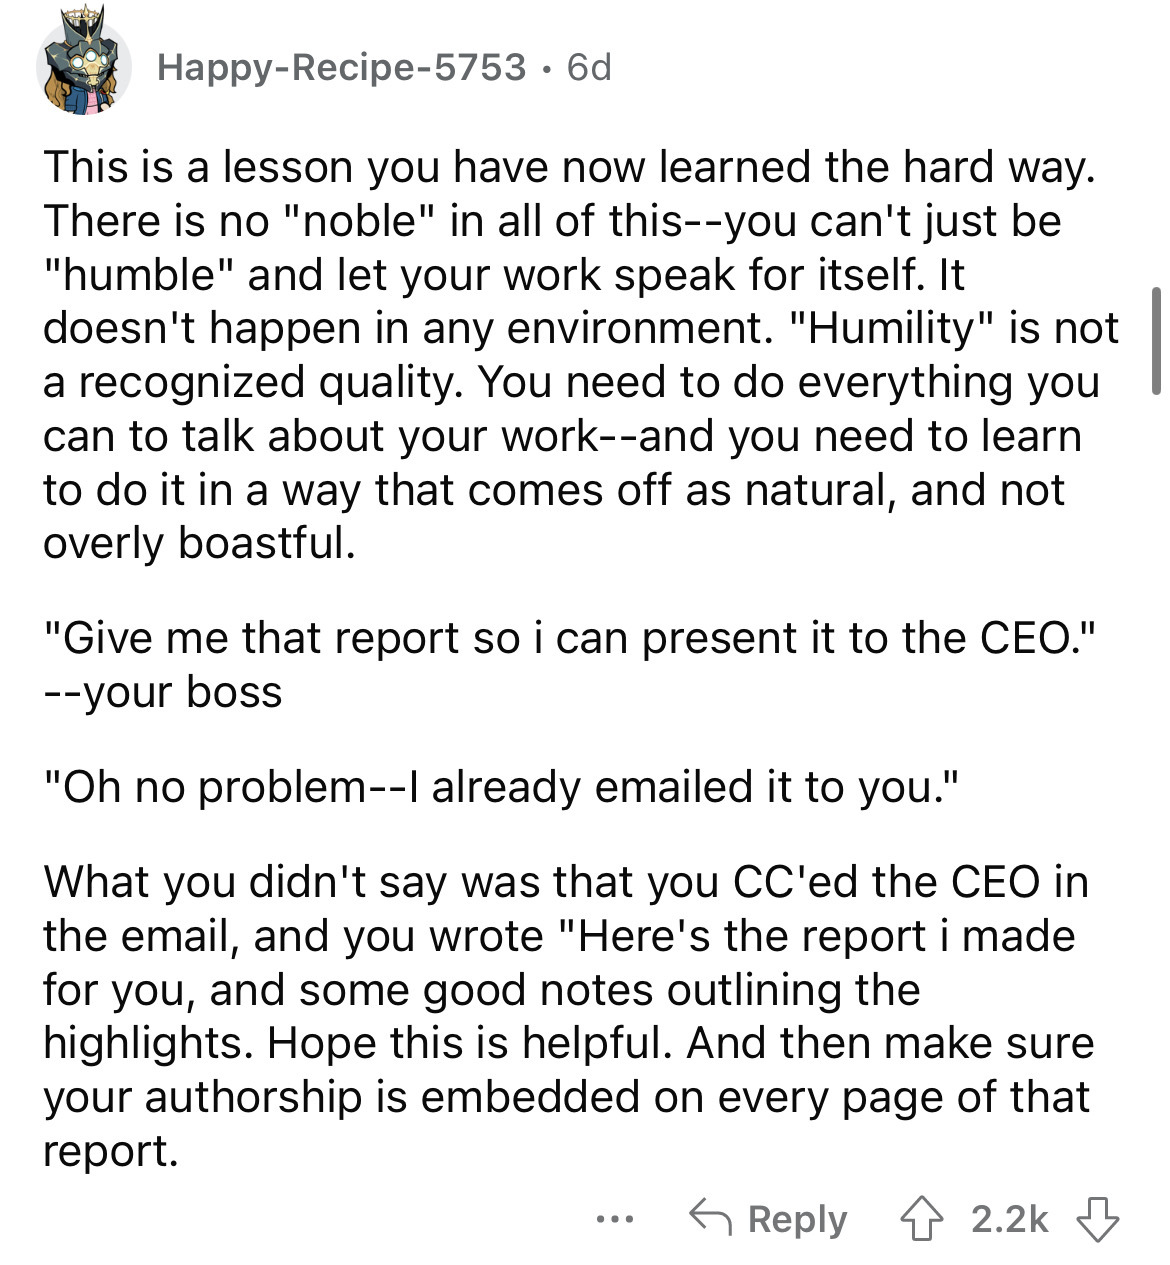 document - HappyRecipe5753 6d This is a lesson you have now learned the hard way. There is no "noble" in all of thisyou can't just be "humble" and let your work speak for itself. It doesn't happen in any environment. "Humility" is not a recognized quality